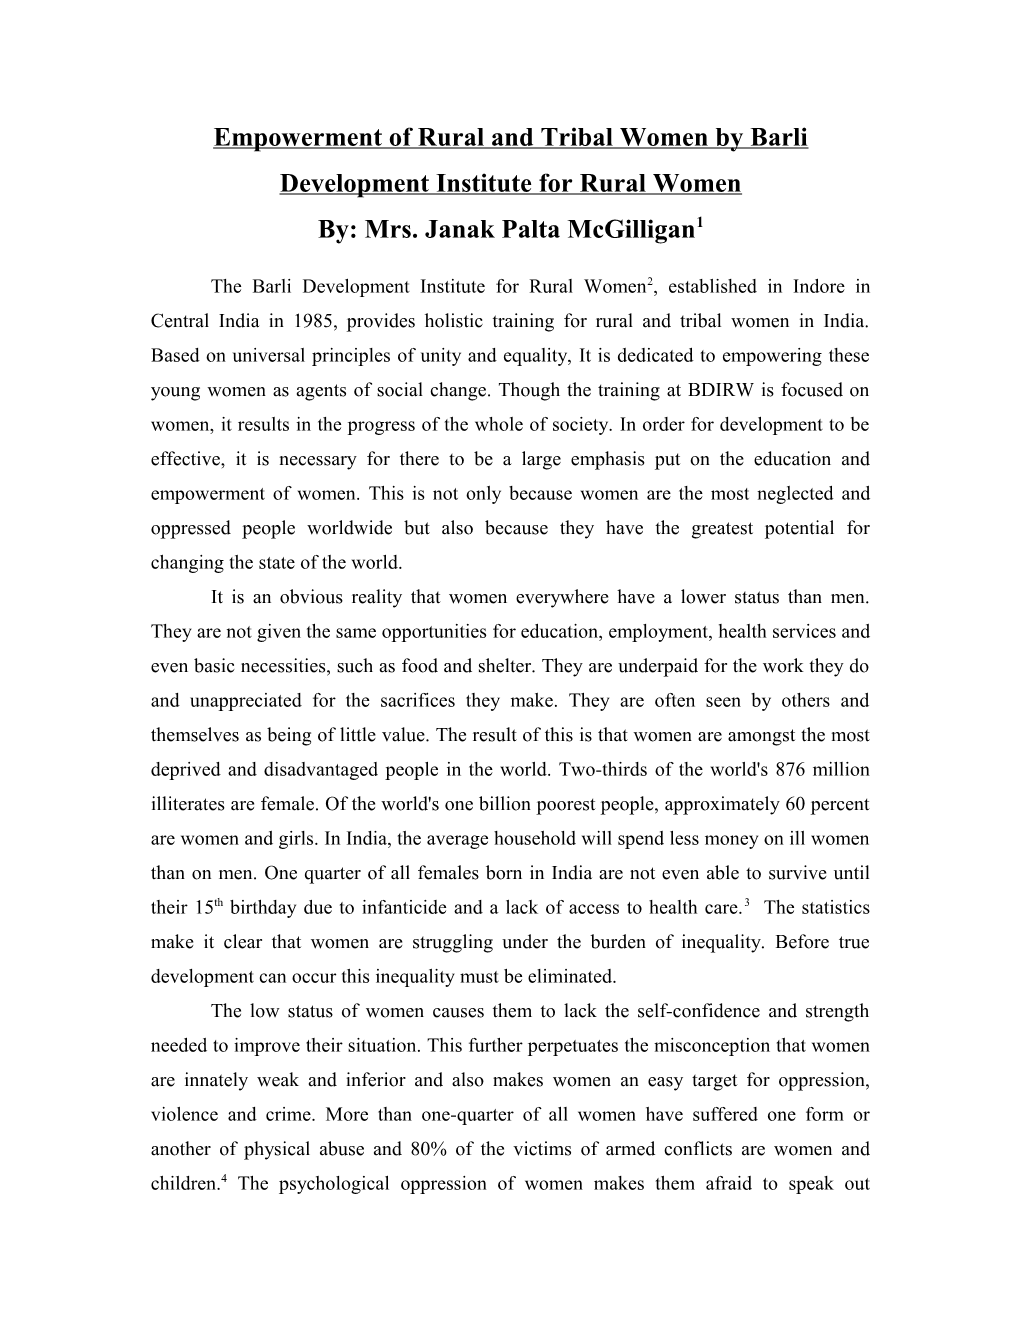 The Role of Women in Development from a Baha'i Perspective